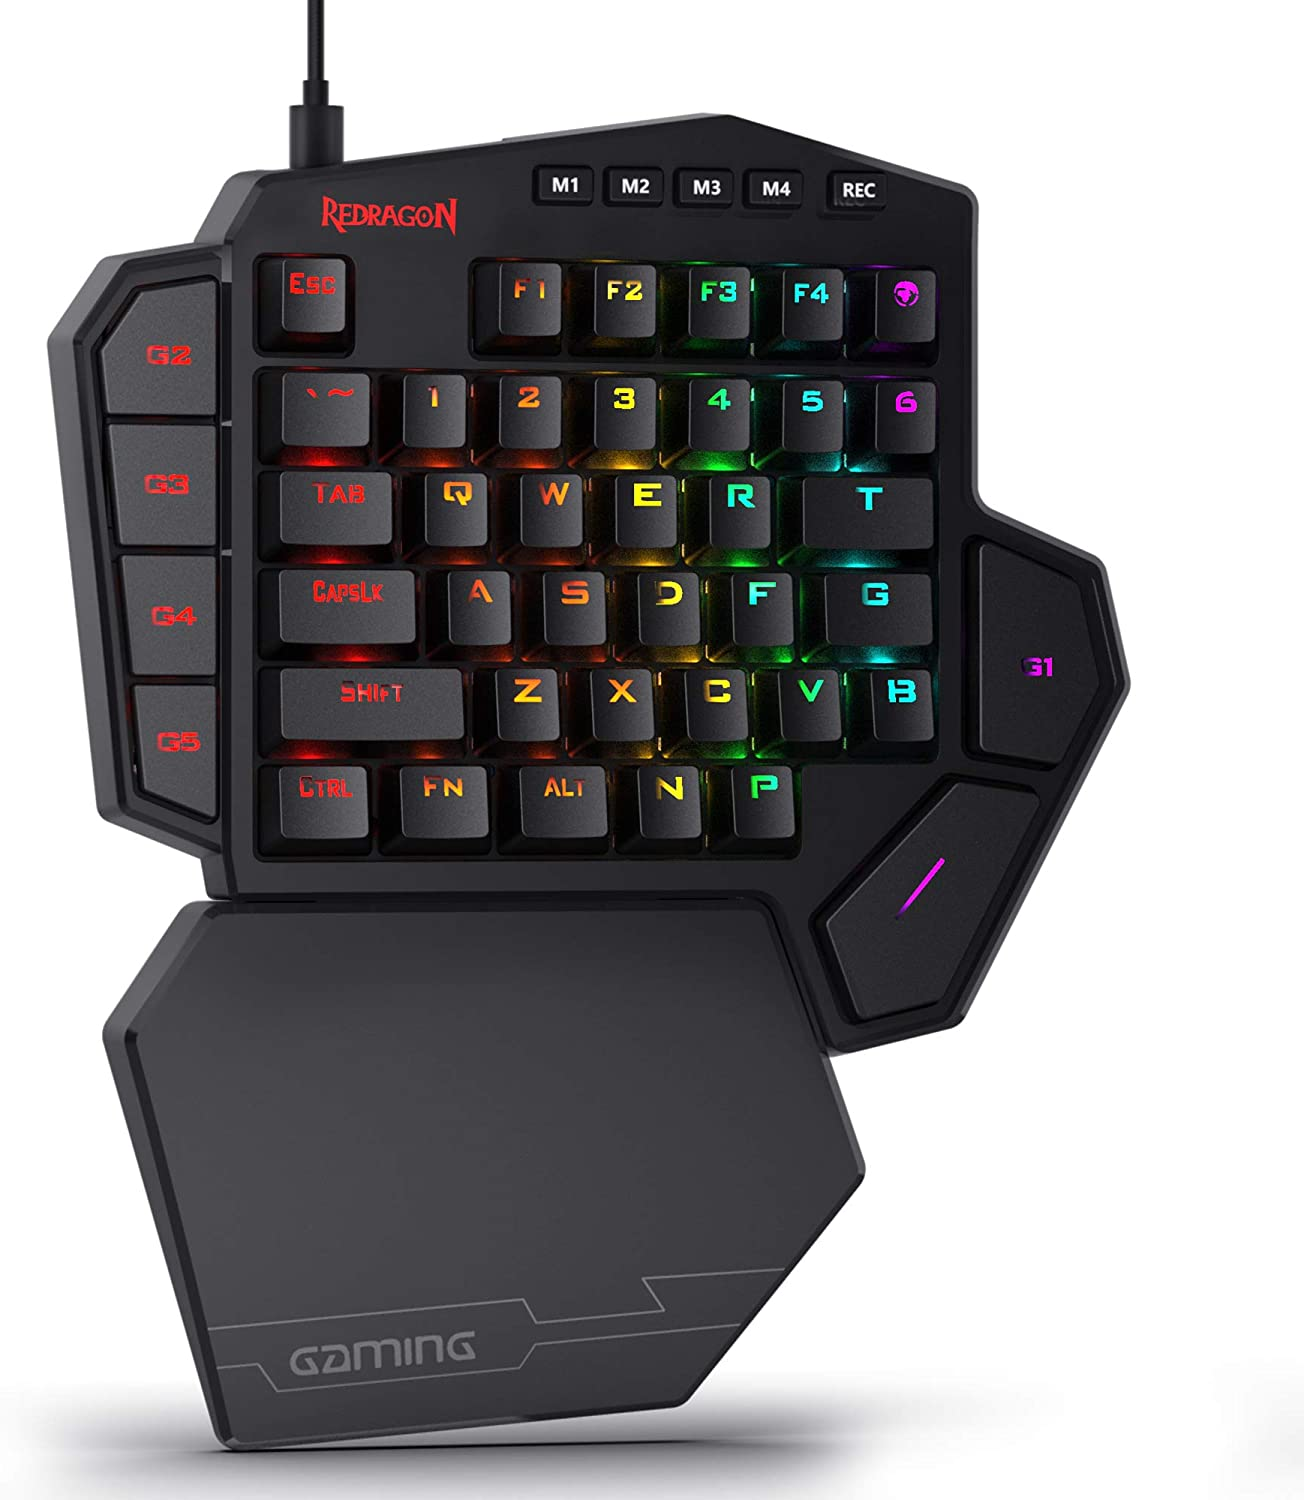 When comparing gaming keyboards vs. keypads, keypads are much simpler to use.